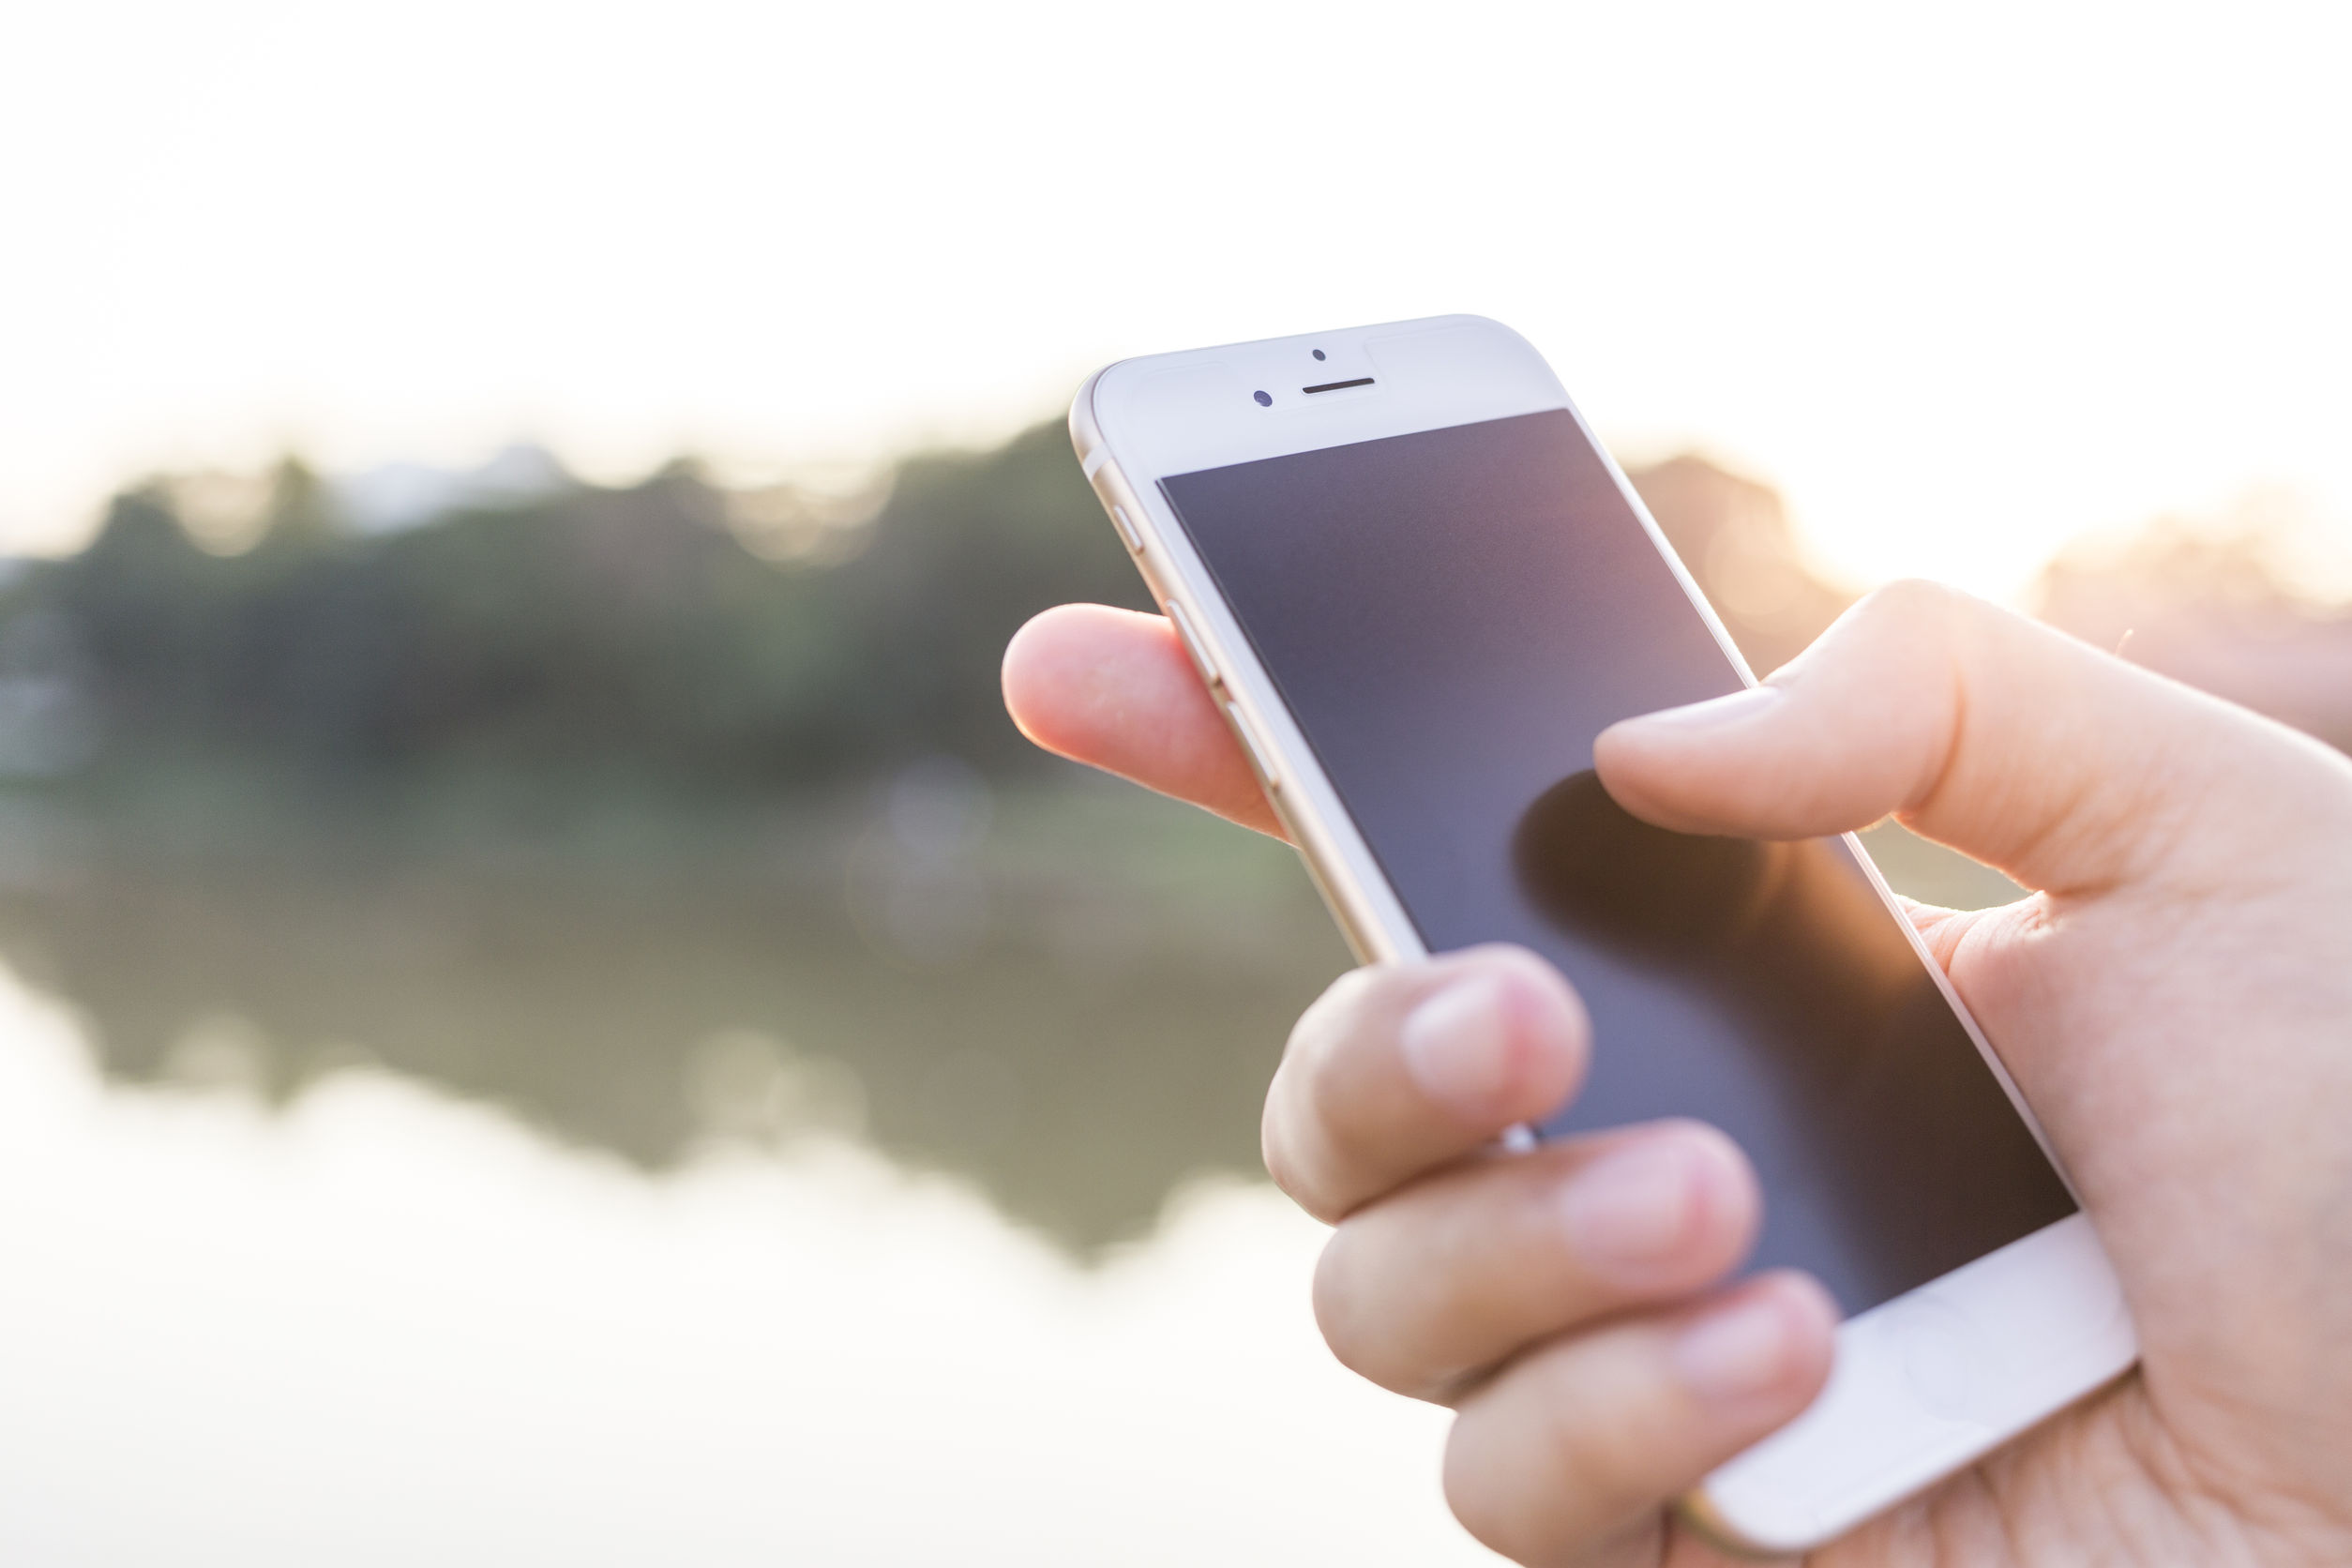 Mobile-First Must Be More Than a Marketing Buzzword